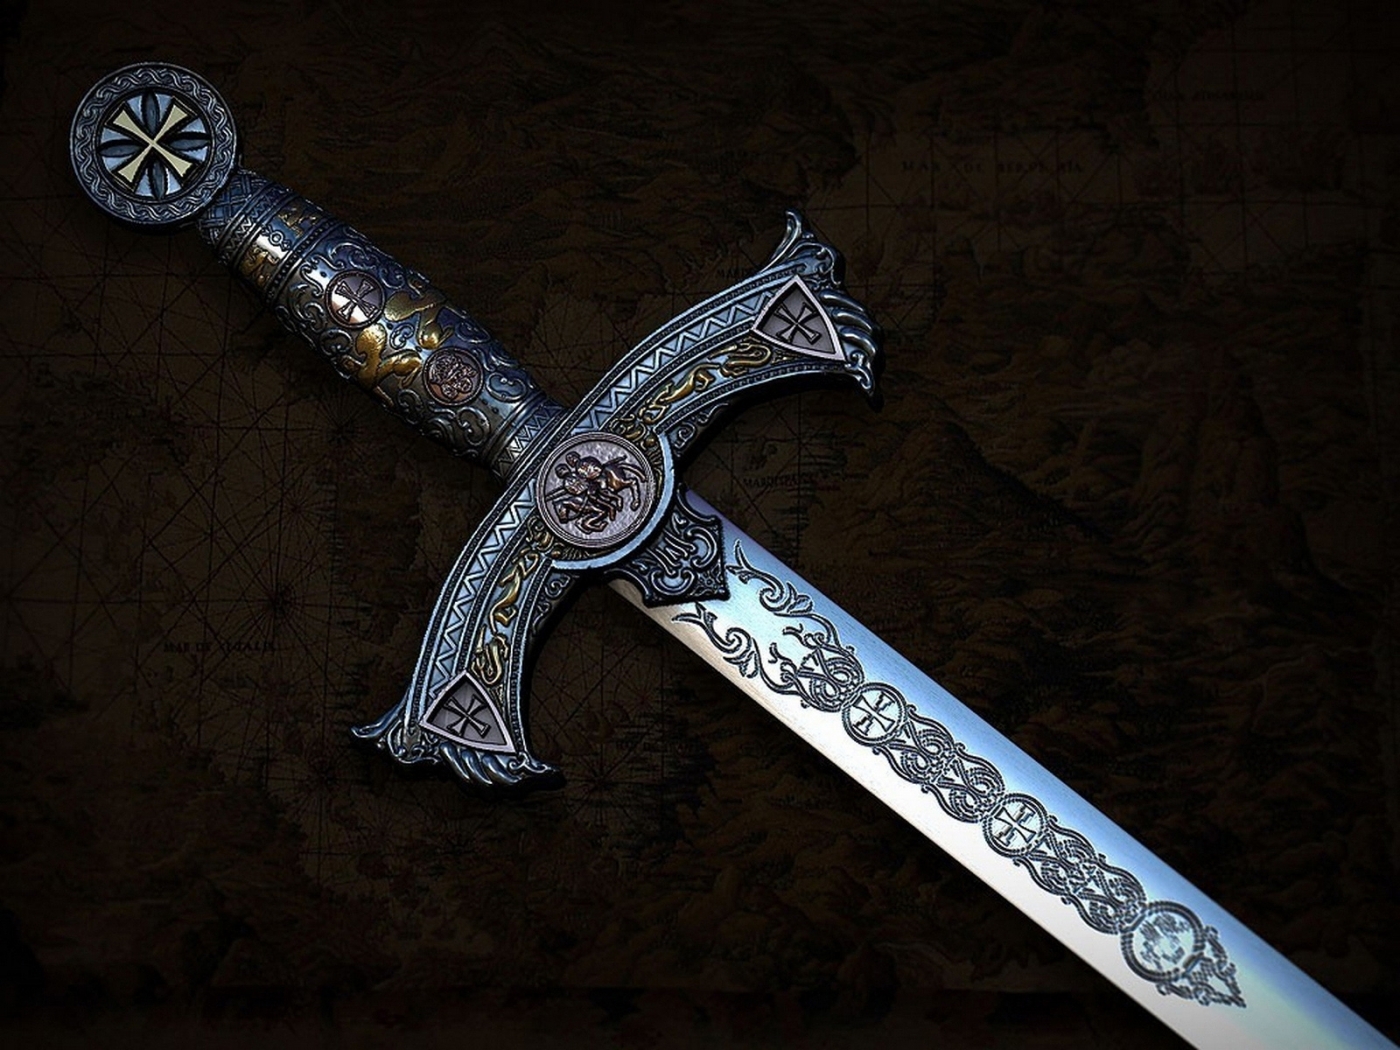 46869 download wallpaper swords, objects, weapon, black screensavers and pictures for free